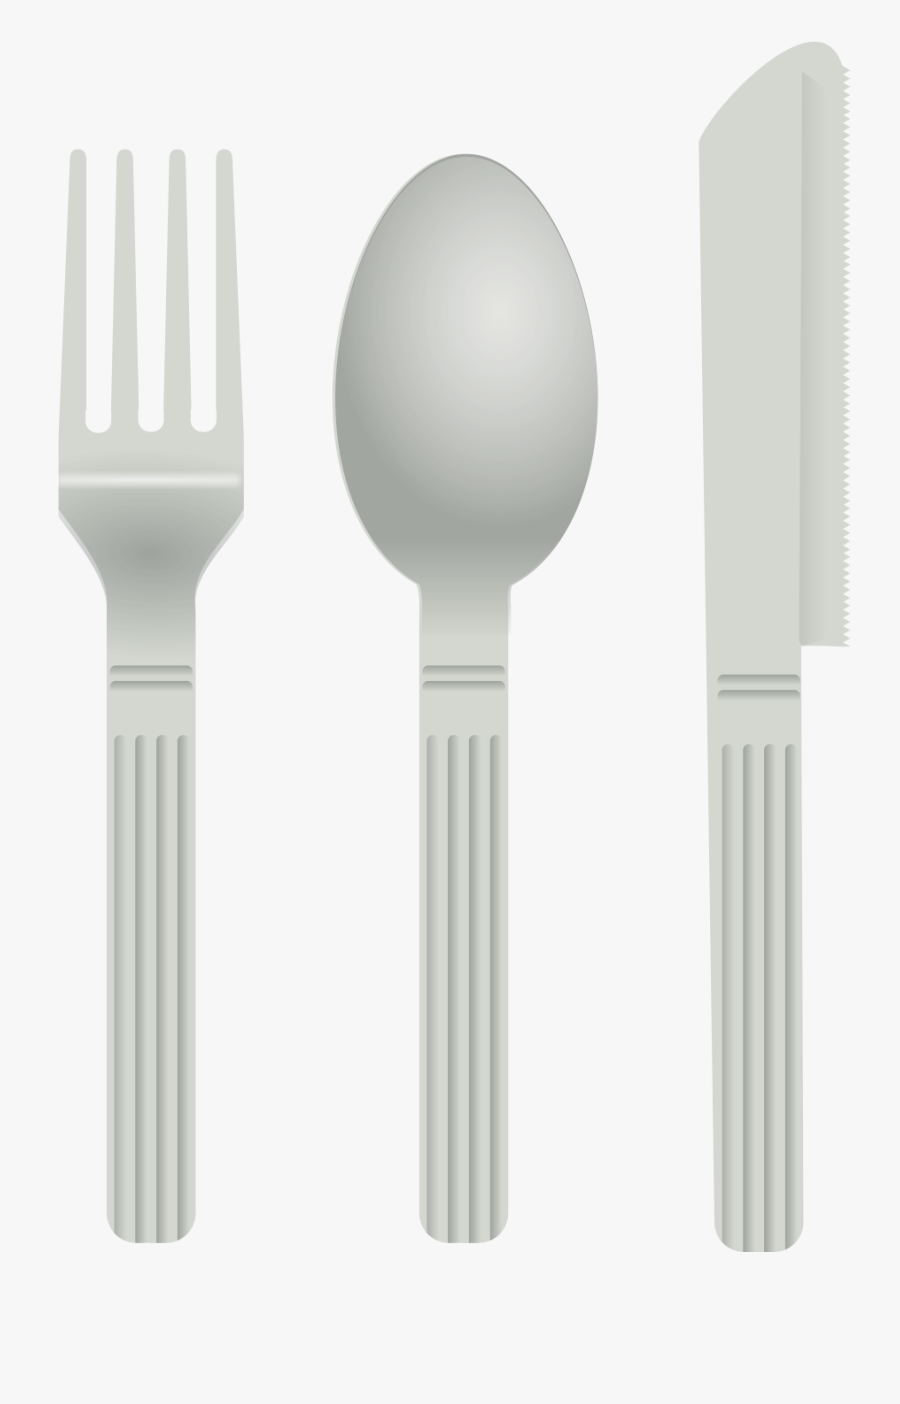 File Knife And Spoon - Spoon Clip Art, Transparent Clipart